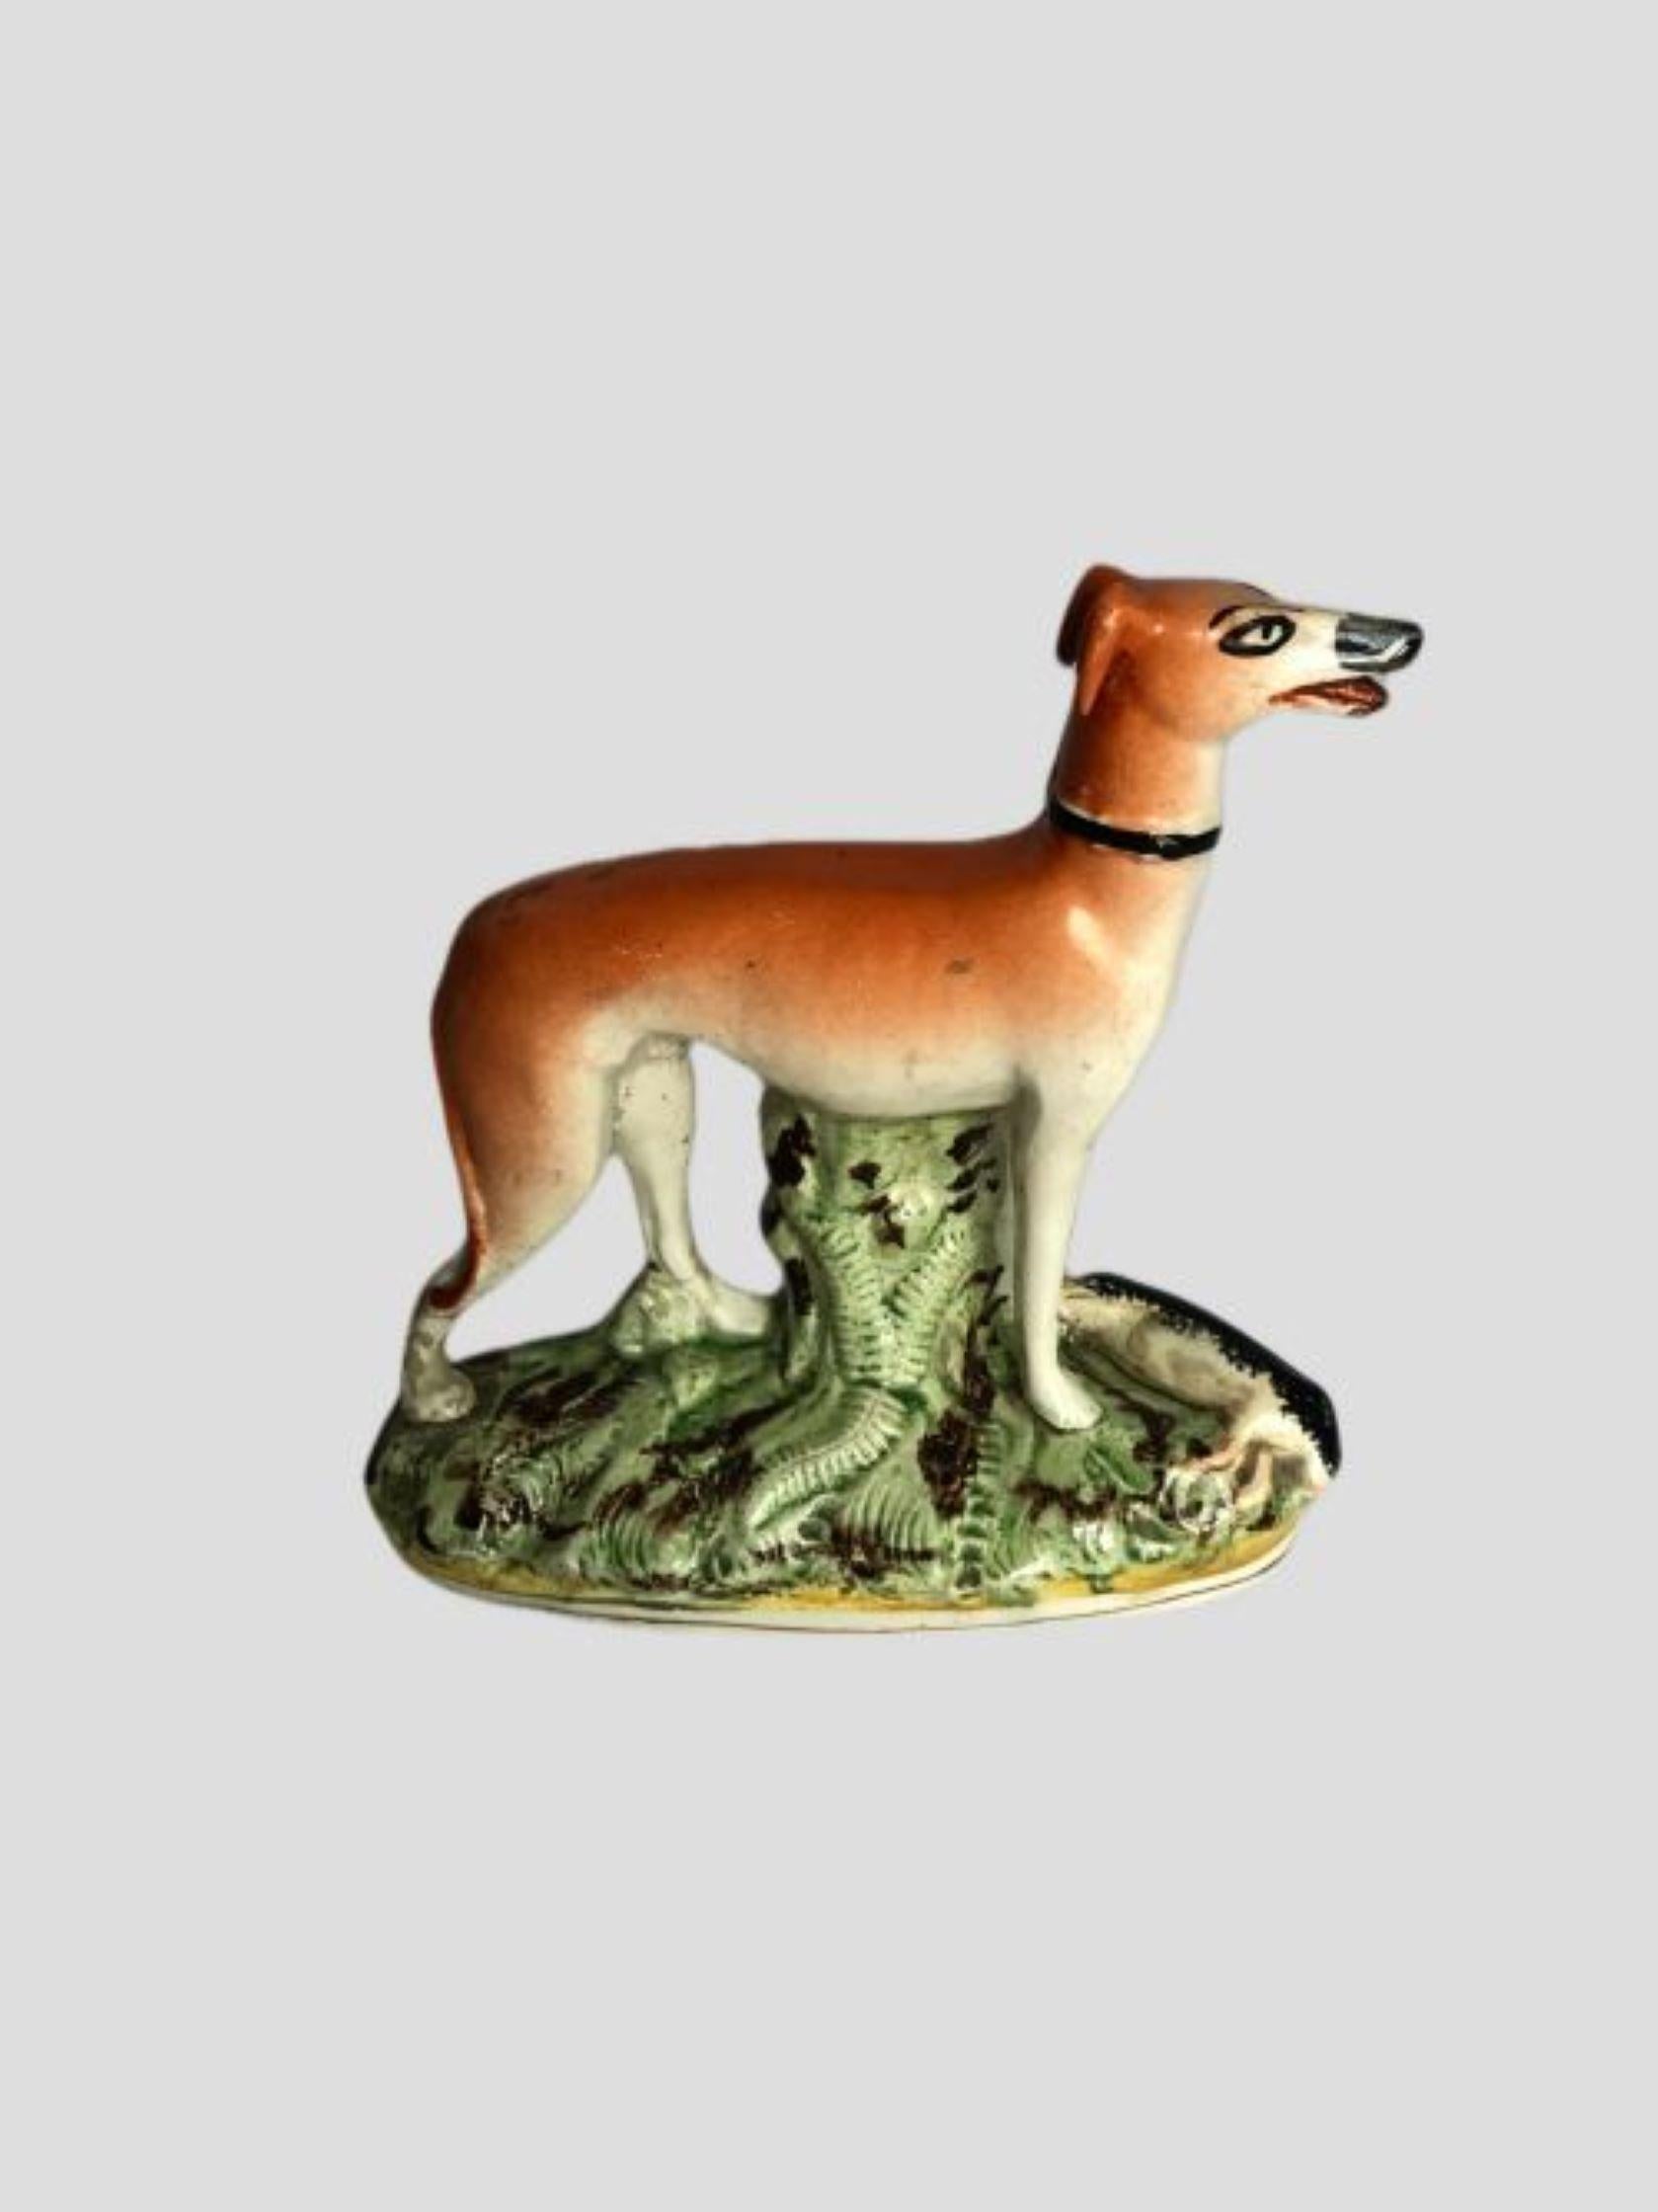 Ceramic Antique Victorian Staffordshire Figure Of A Greyhound Dog For Sale